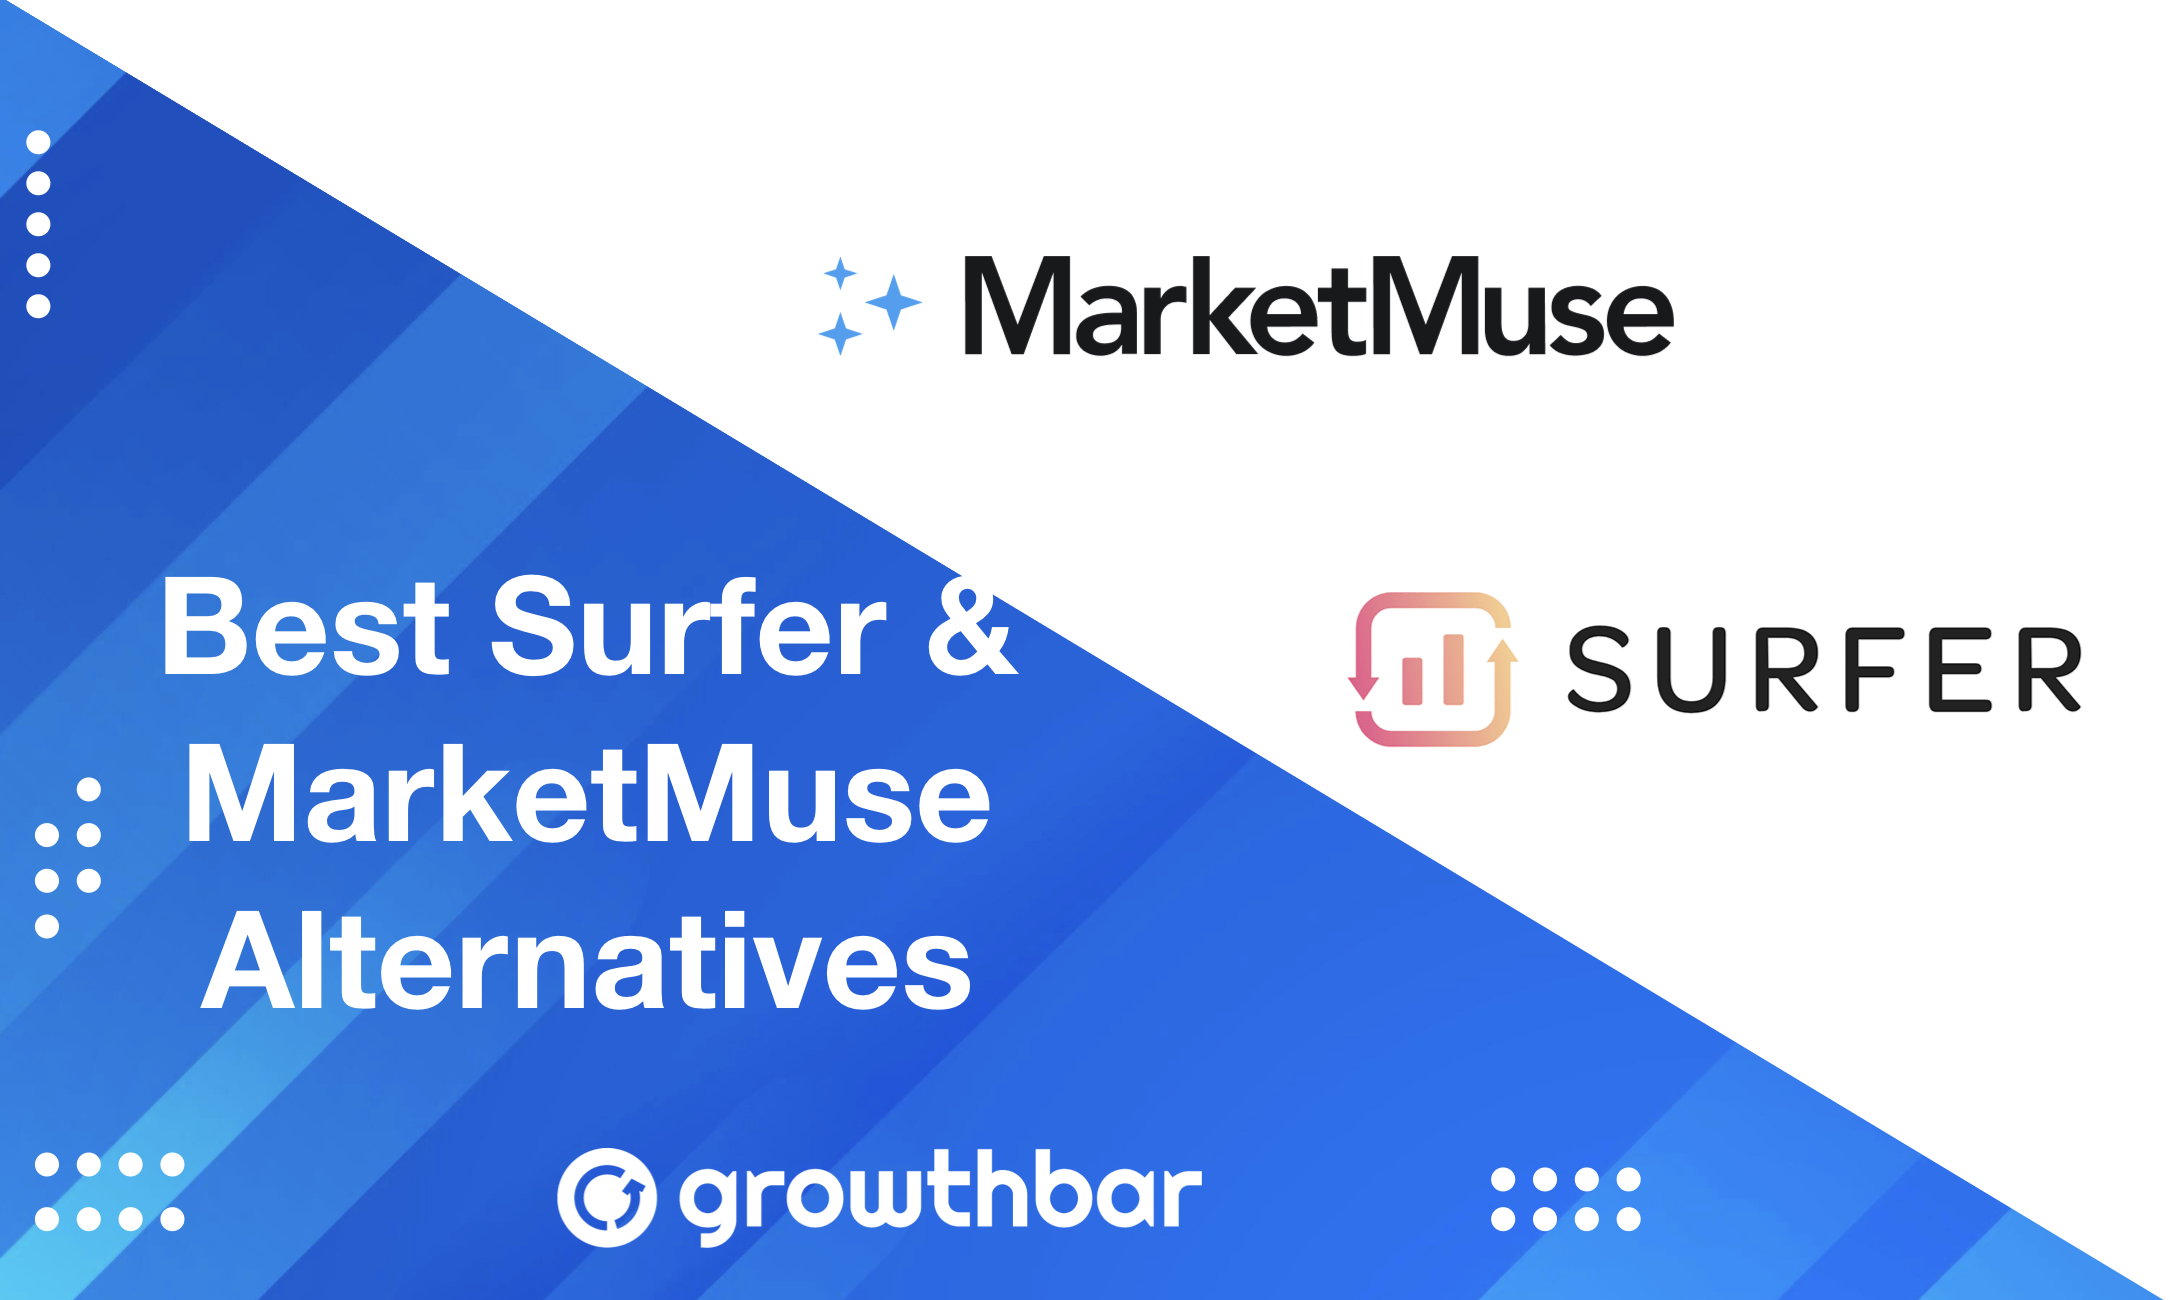 SurferSEO Review [2023] Pricing / Features / Alternative